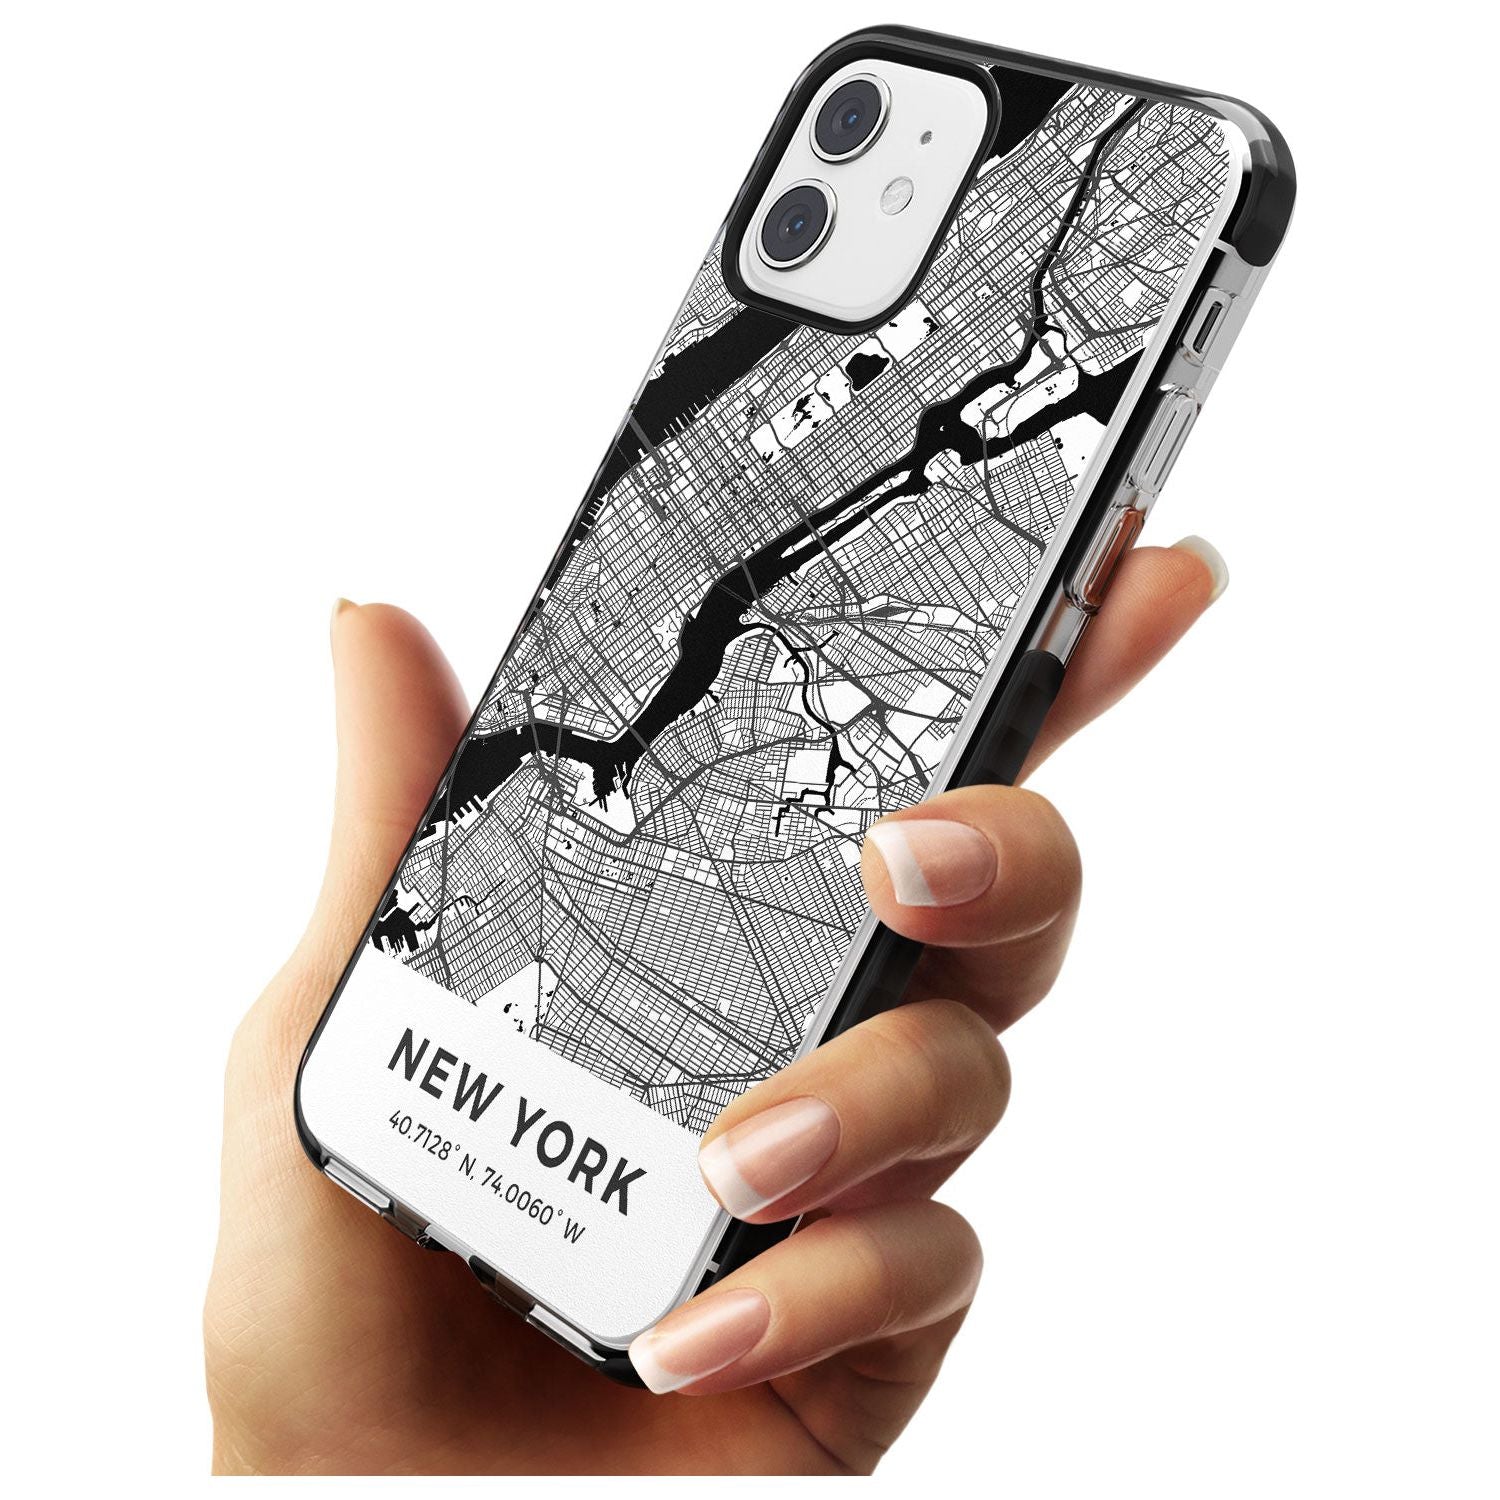 Map of New York, New York Black Impact Phone Case for iPhone 11